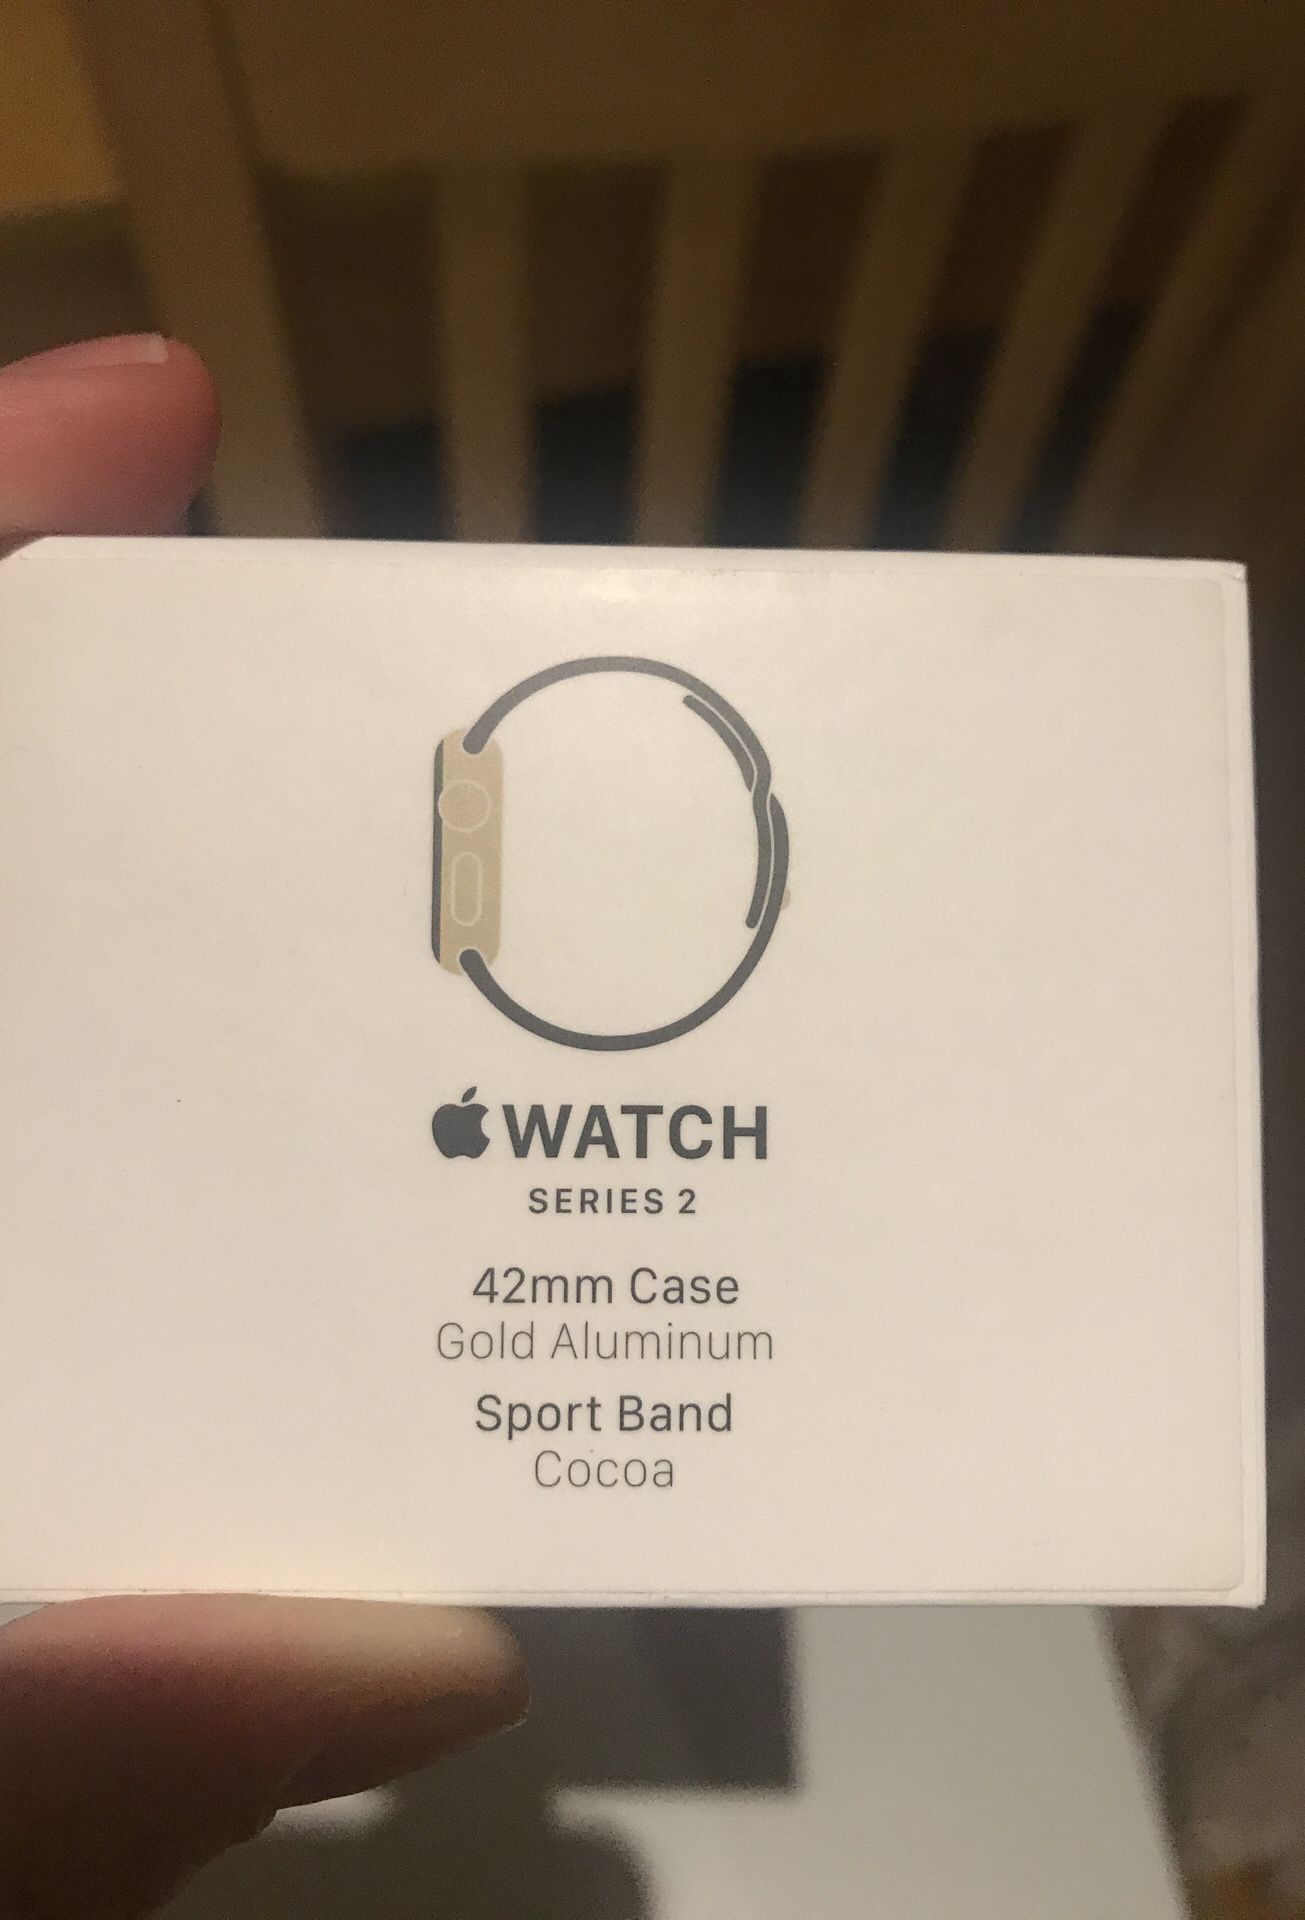 Apple Watch series 2 - Wi-Fi - 42mm gold case - great condition- some scratches on screen includes one additional band